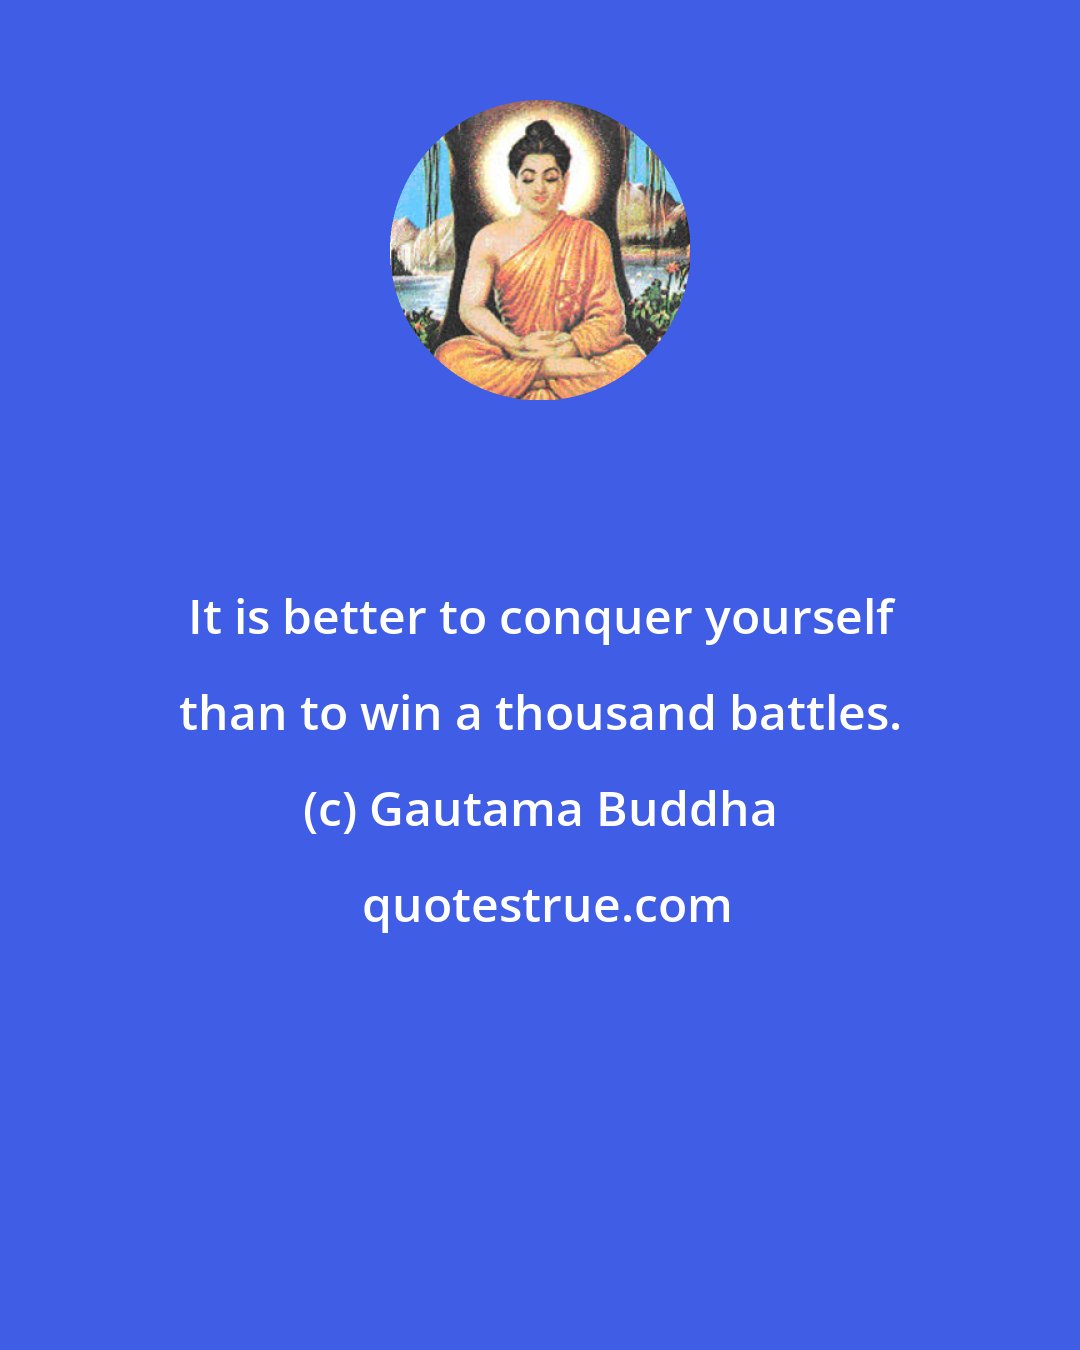 Gautama Buddha: It is better to conquer yourself than to win a thousand battles.